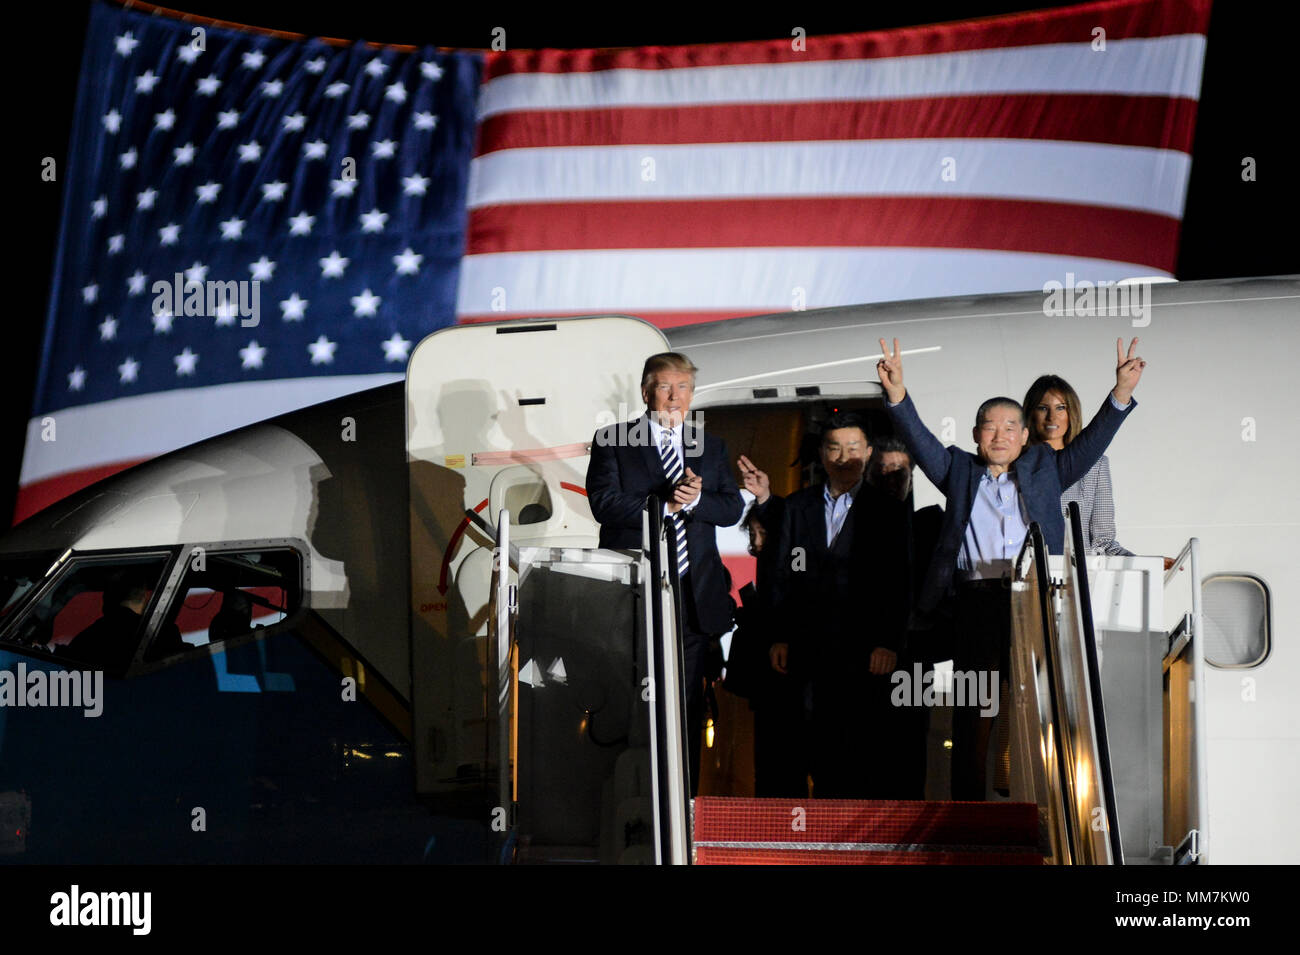 U.S. President Donald Trump and First Lady Melania Trump welcome home three American detainees freed by North Korea on arrival at Joint Base Andrews May 10, 2018 in Clinton, Maryland. The three include Kim Dong-chul, Tony Kim and Kim Hak-song released as a gesture of goodwill ahead of the planned meeting between Trump and North Korean leader Kim Jong-un. Stock Photo